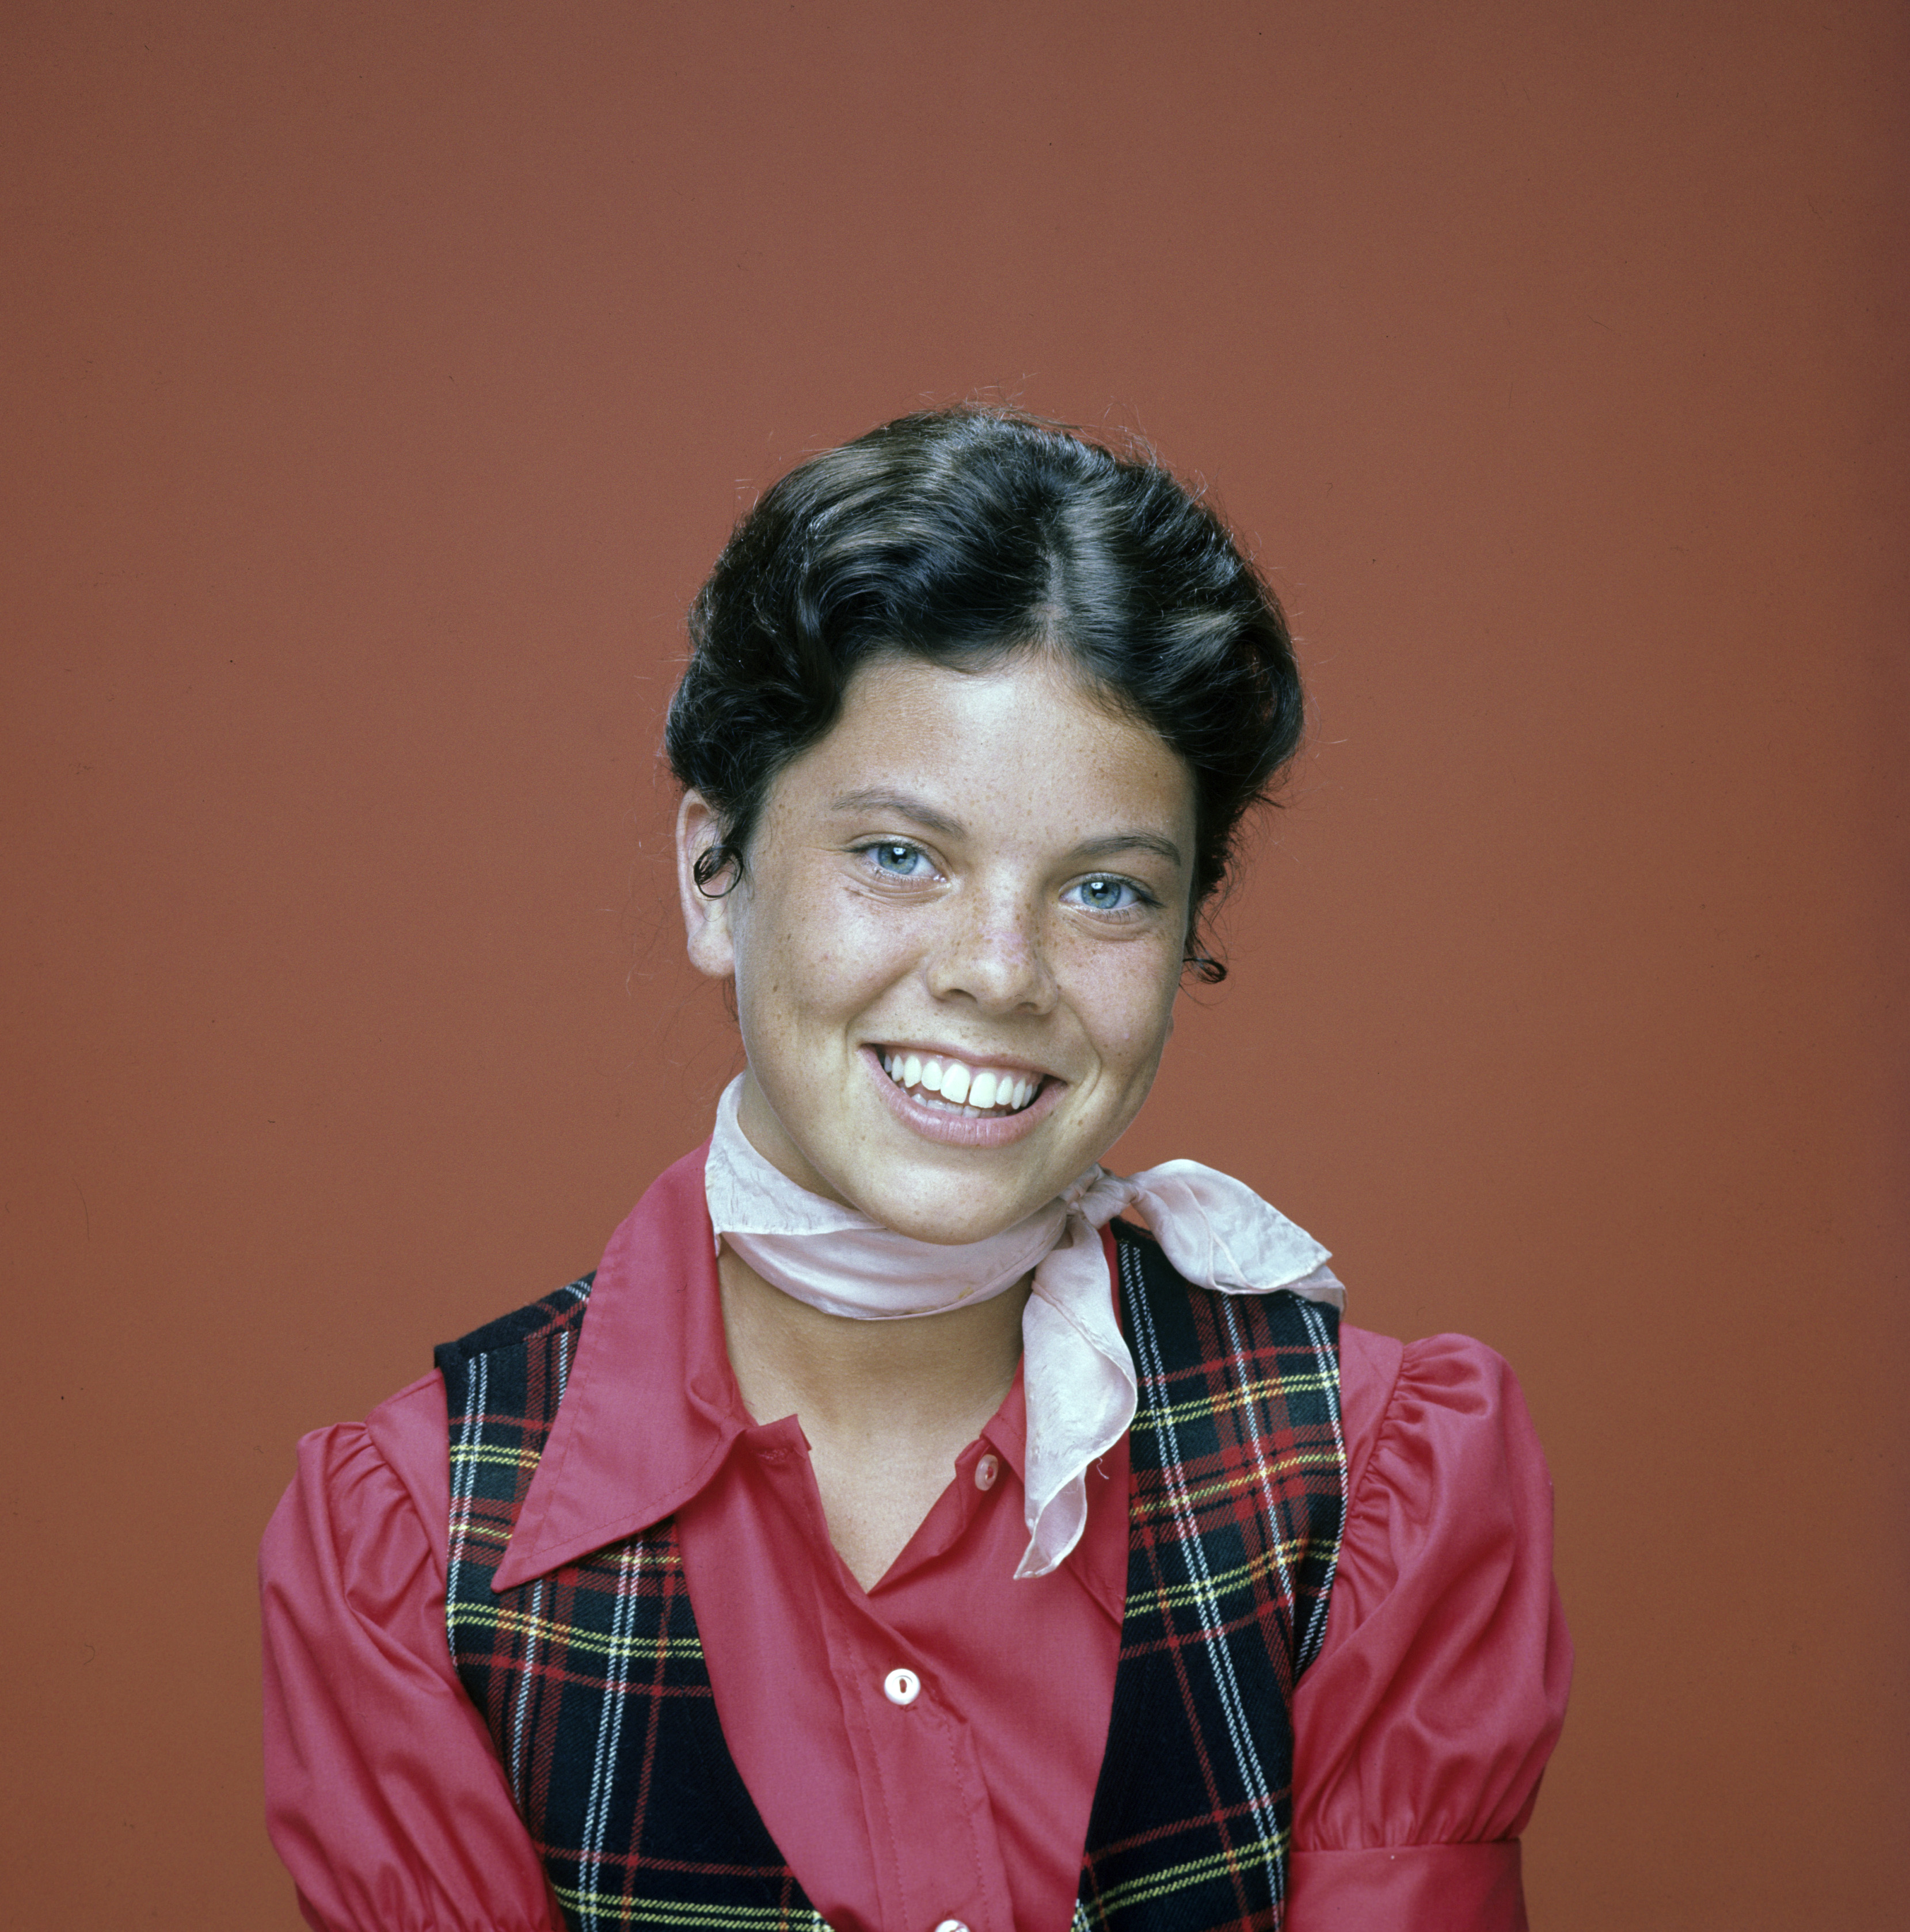 Erin Moran on the set of "Happy Days" on October 7, 1975 | Source: Getty Images